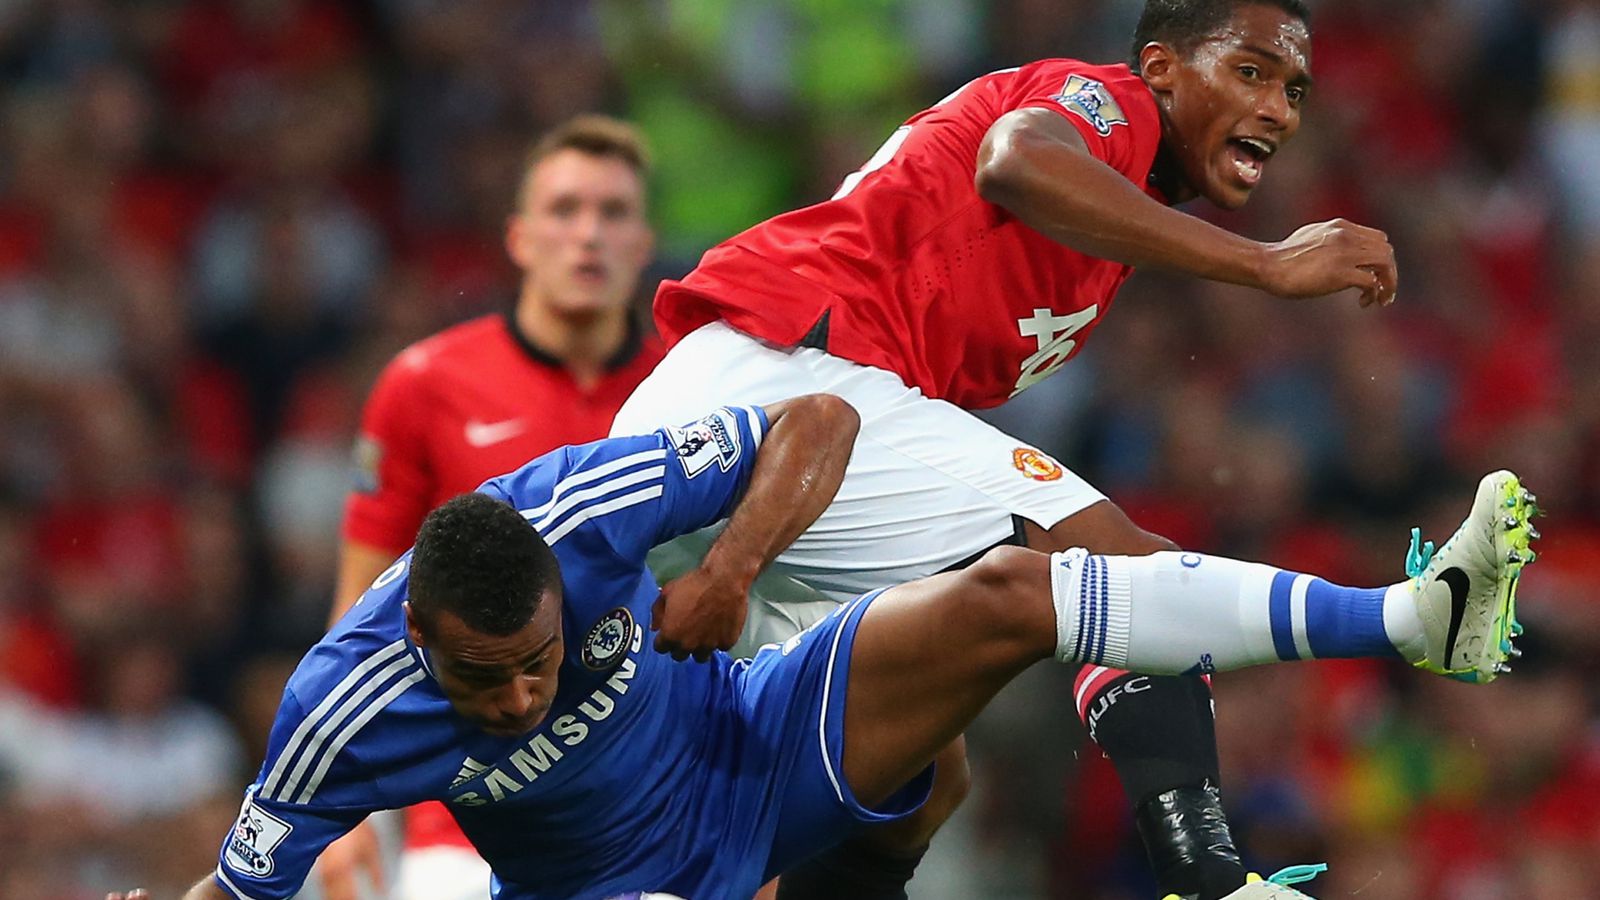 Manchester United vs. Chelsea: Halftime score 0-0, Dull 45 minutes at